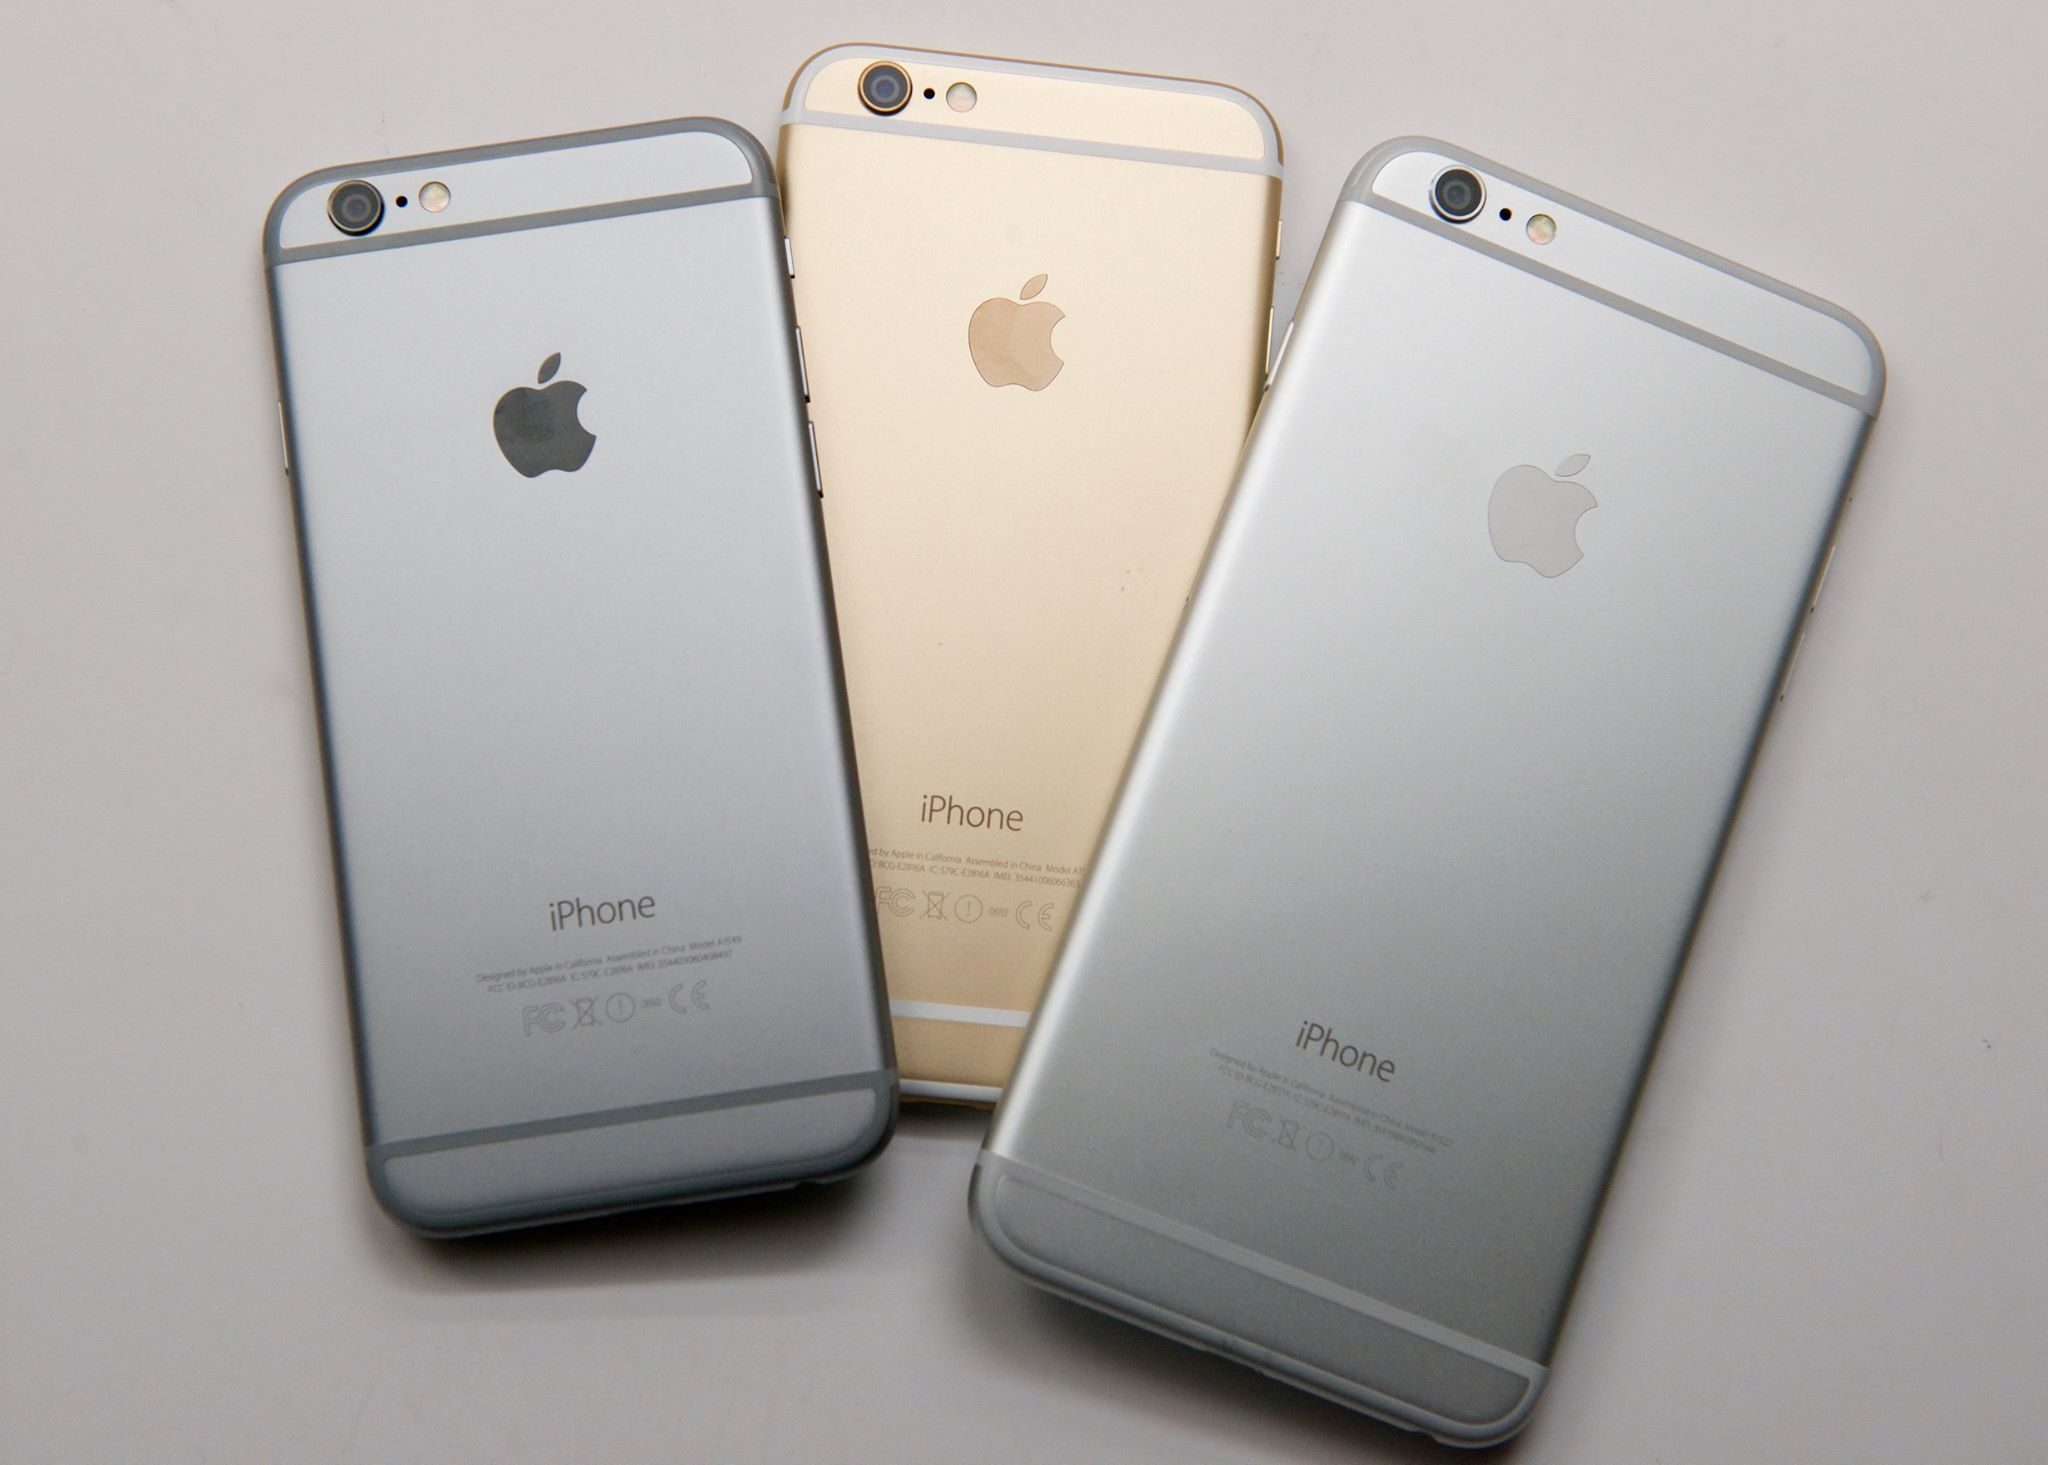 Here's what you need to know about buying an iPhone 6 from the online Apple Store on AT&T.